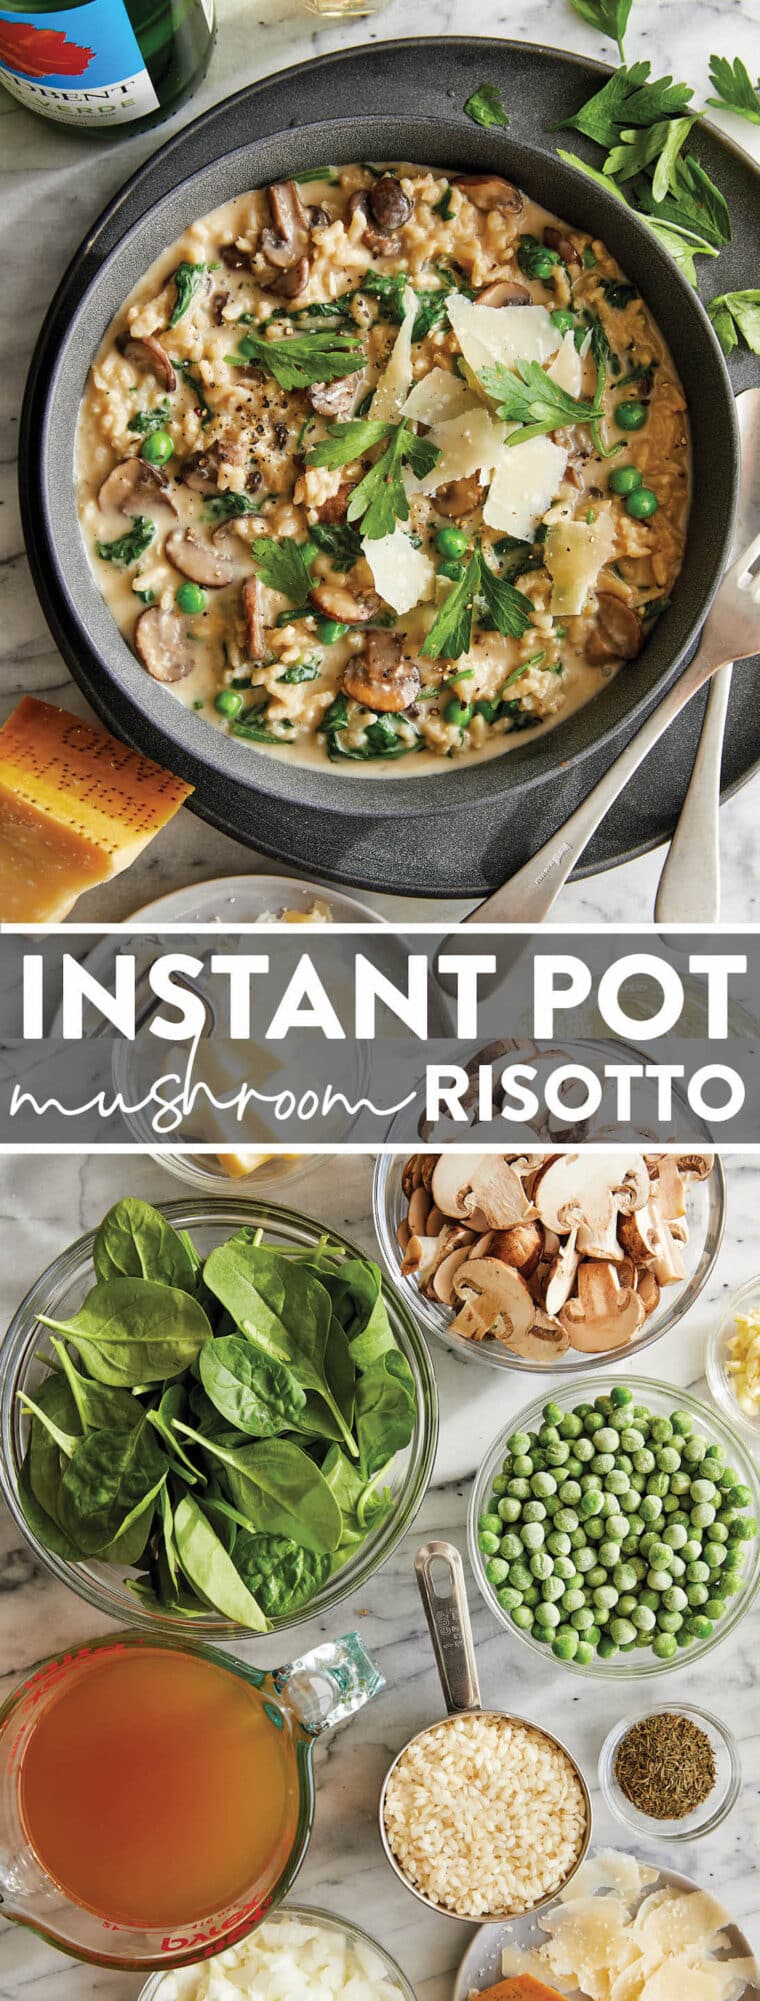 Instant Pot Mushroom Risotto - Truly the EASIEST no-fuss risotto! Amazingly rich + creamy, loaded with mushrooms, spinach, peas and Parmesan!